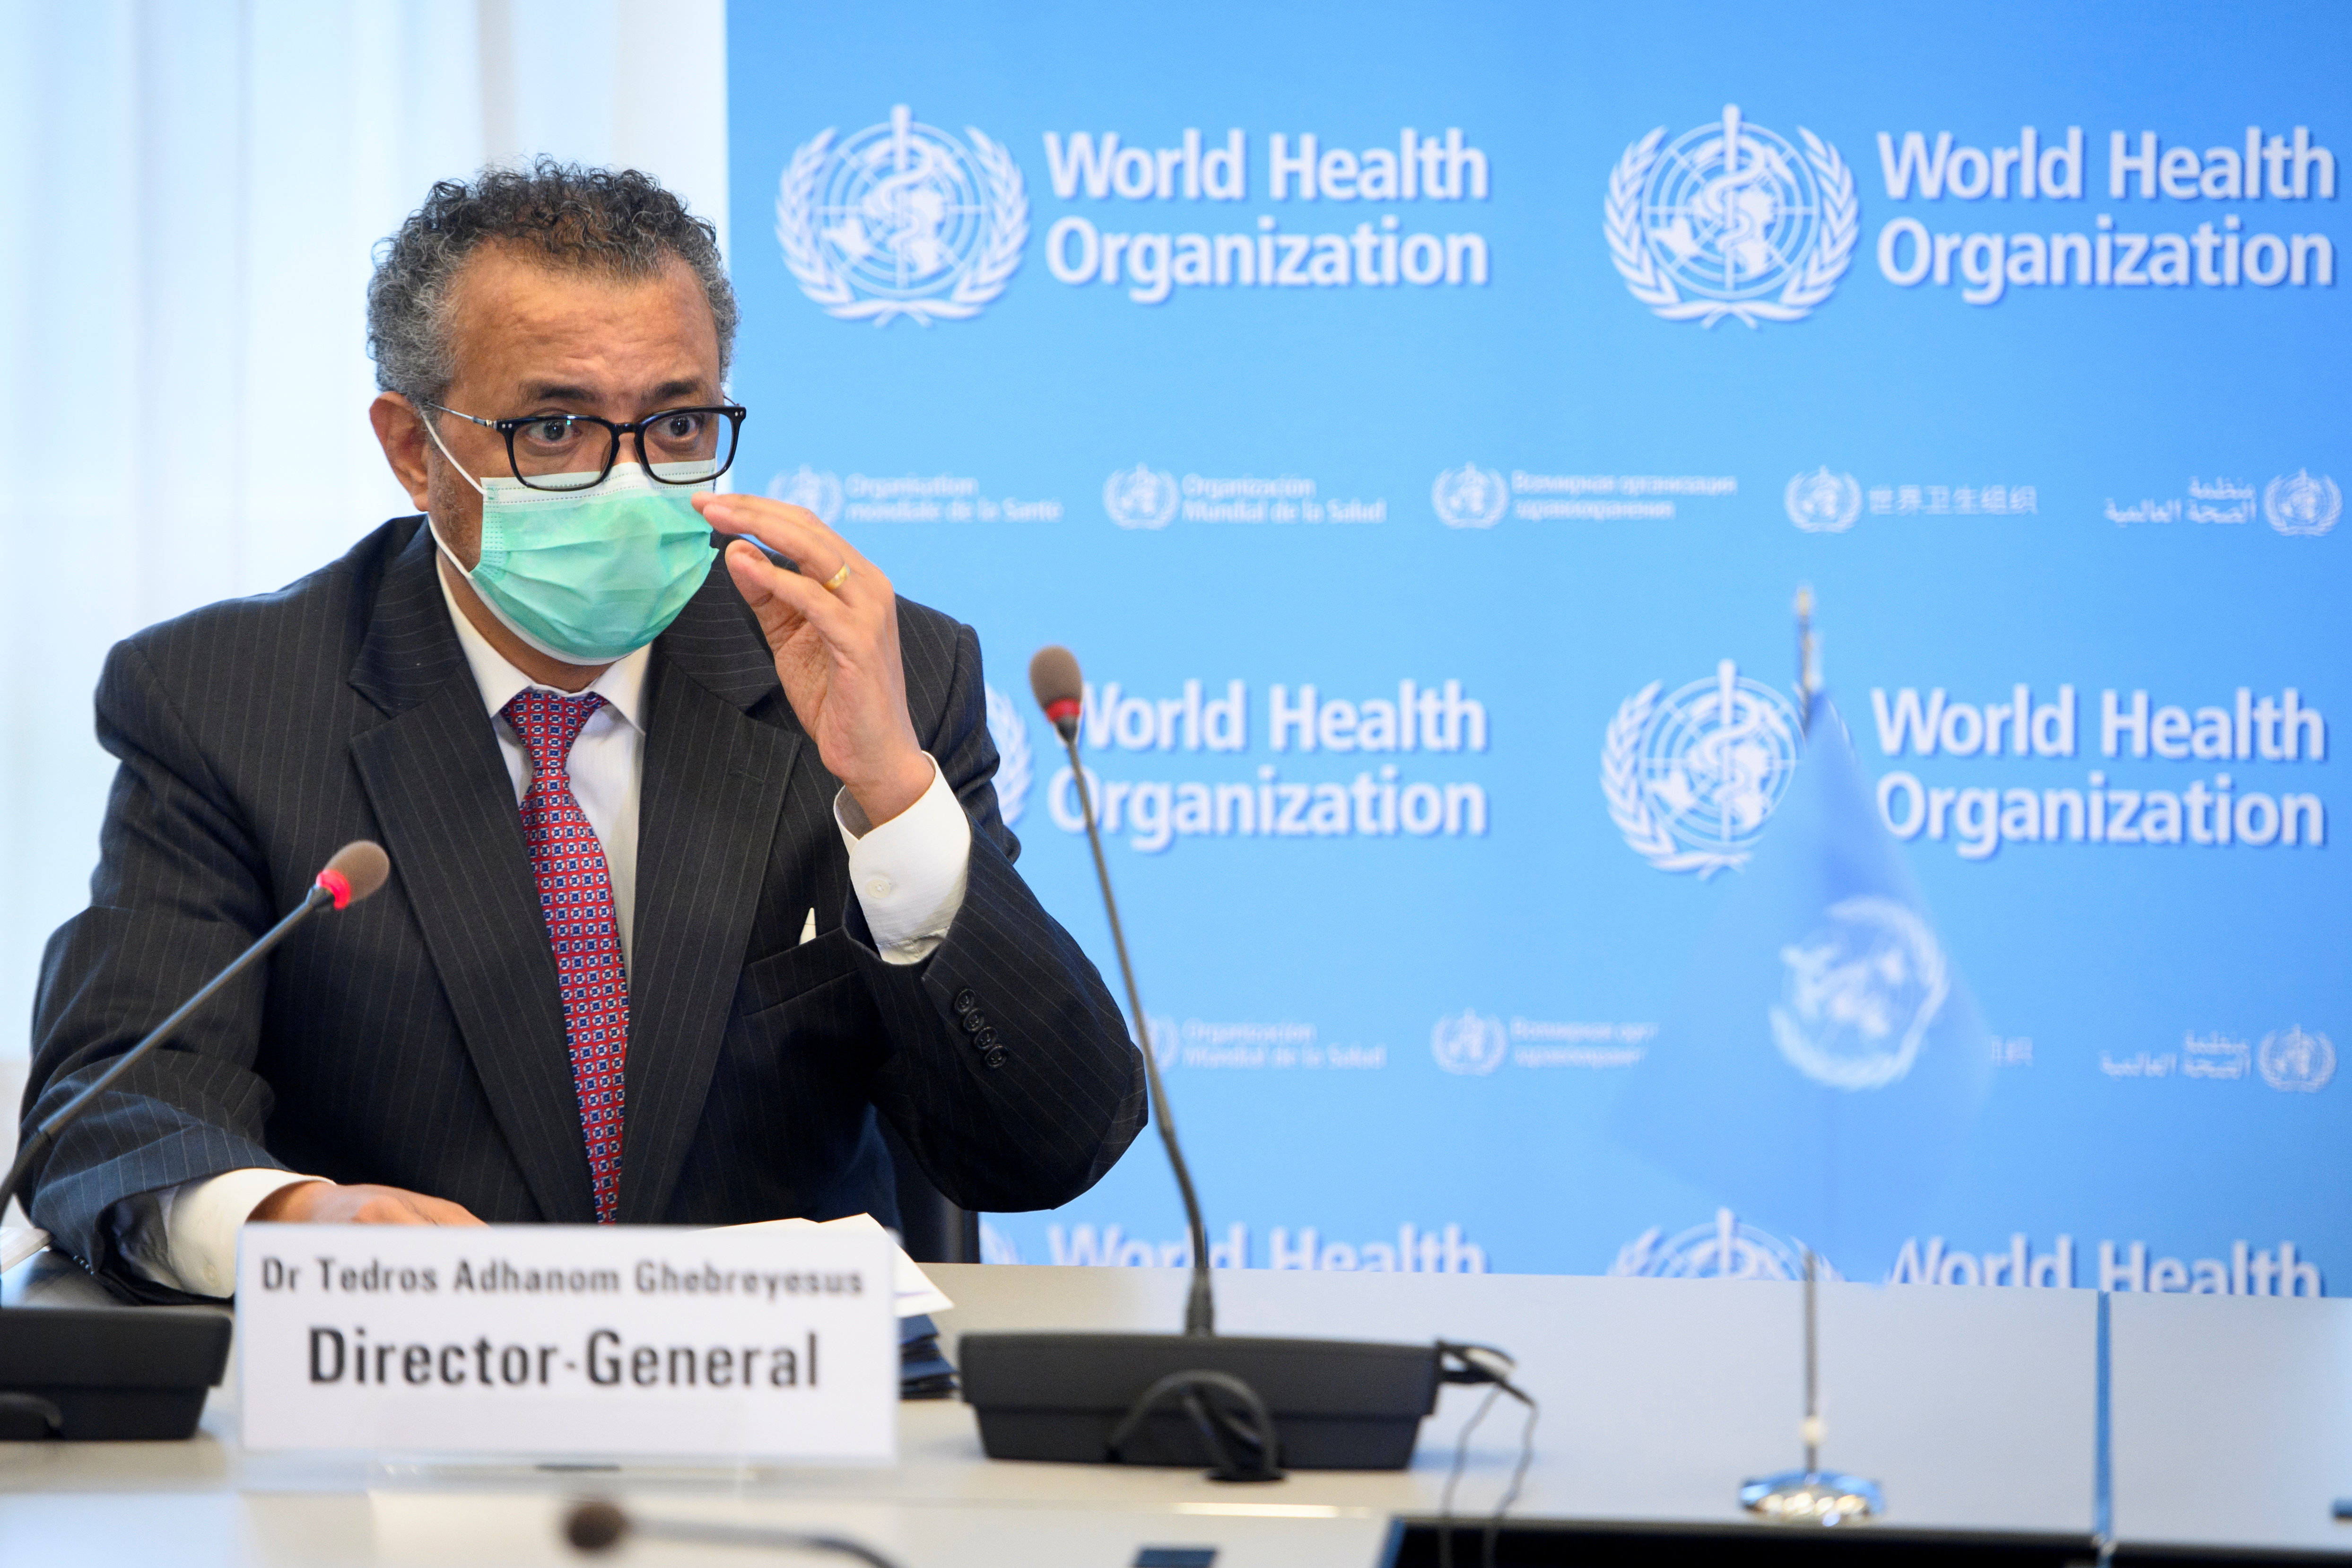 Bilateral meeting on the sidelines of annual World Health Assembly in Geneva